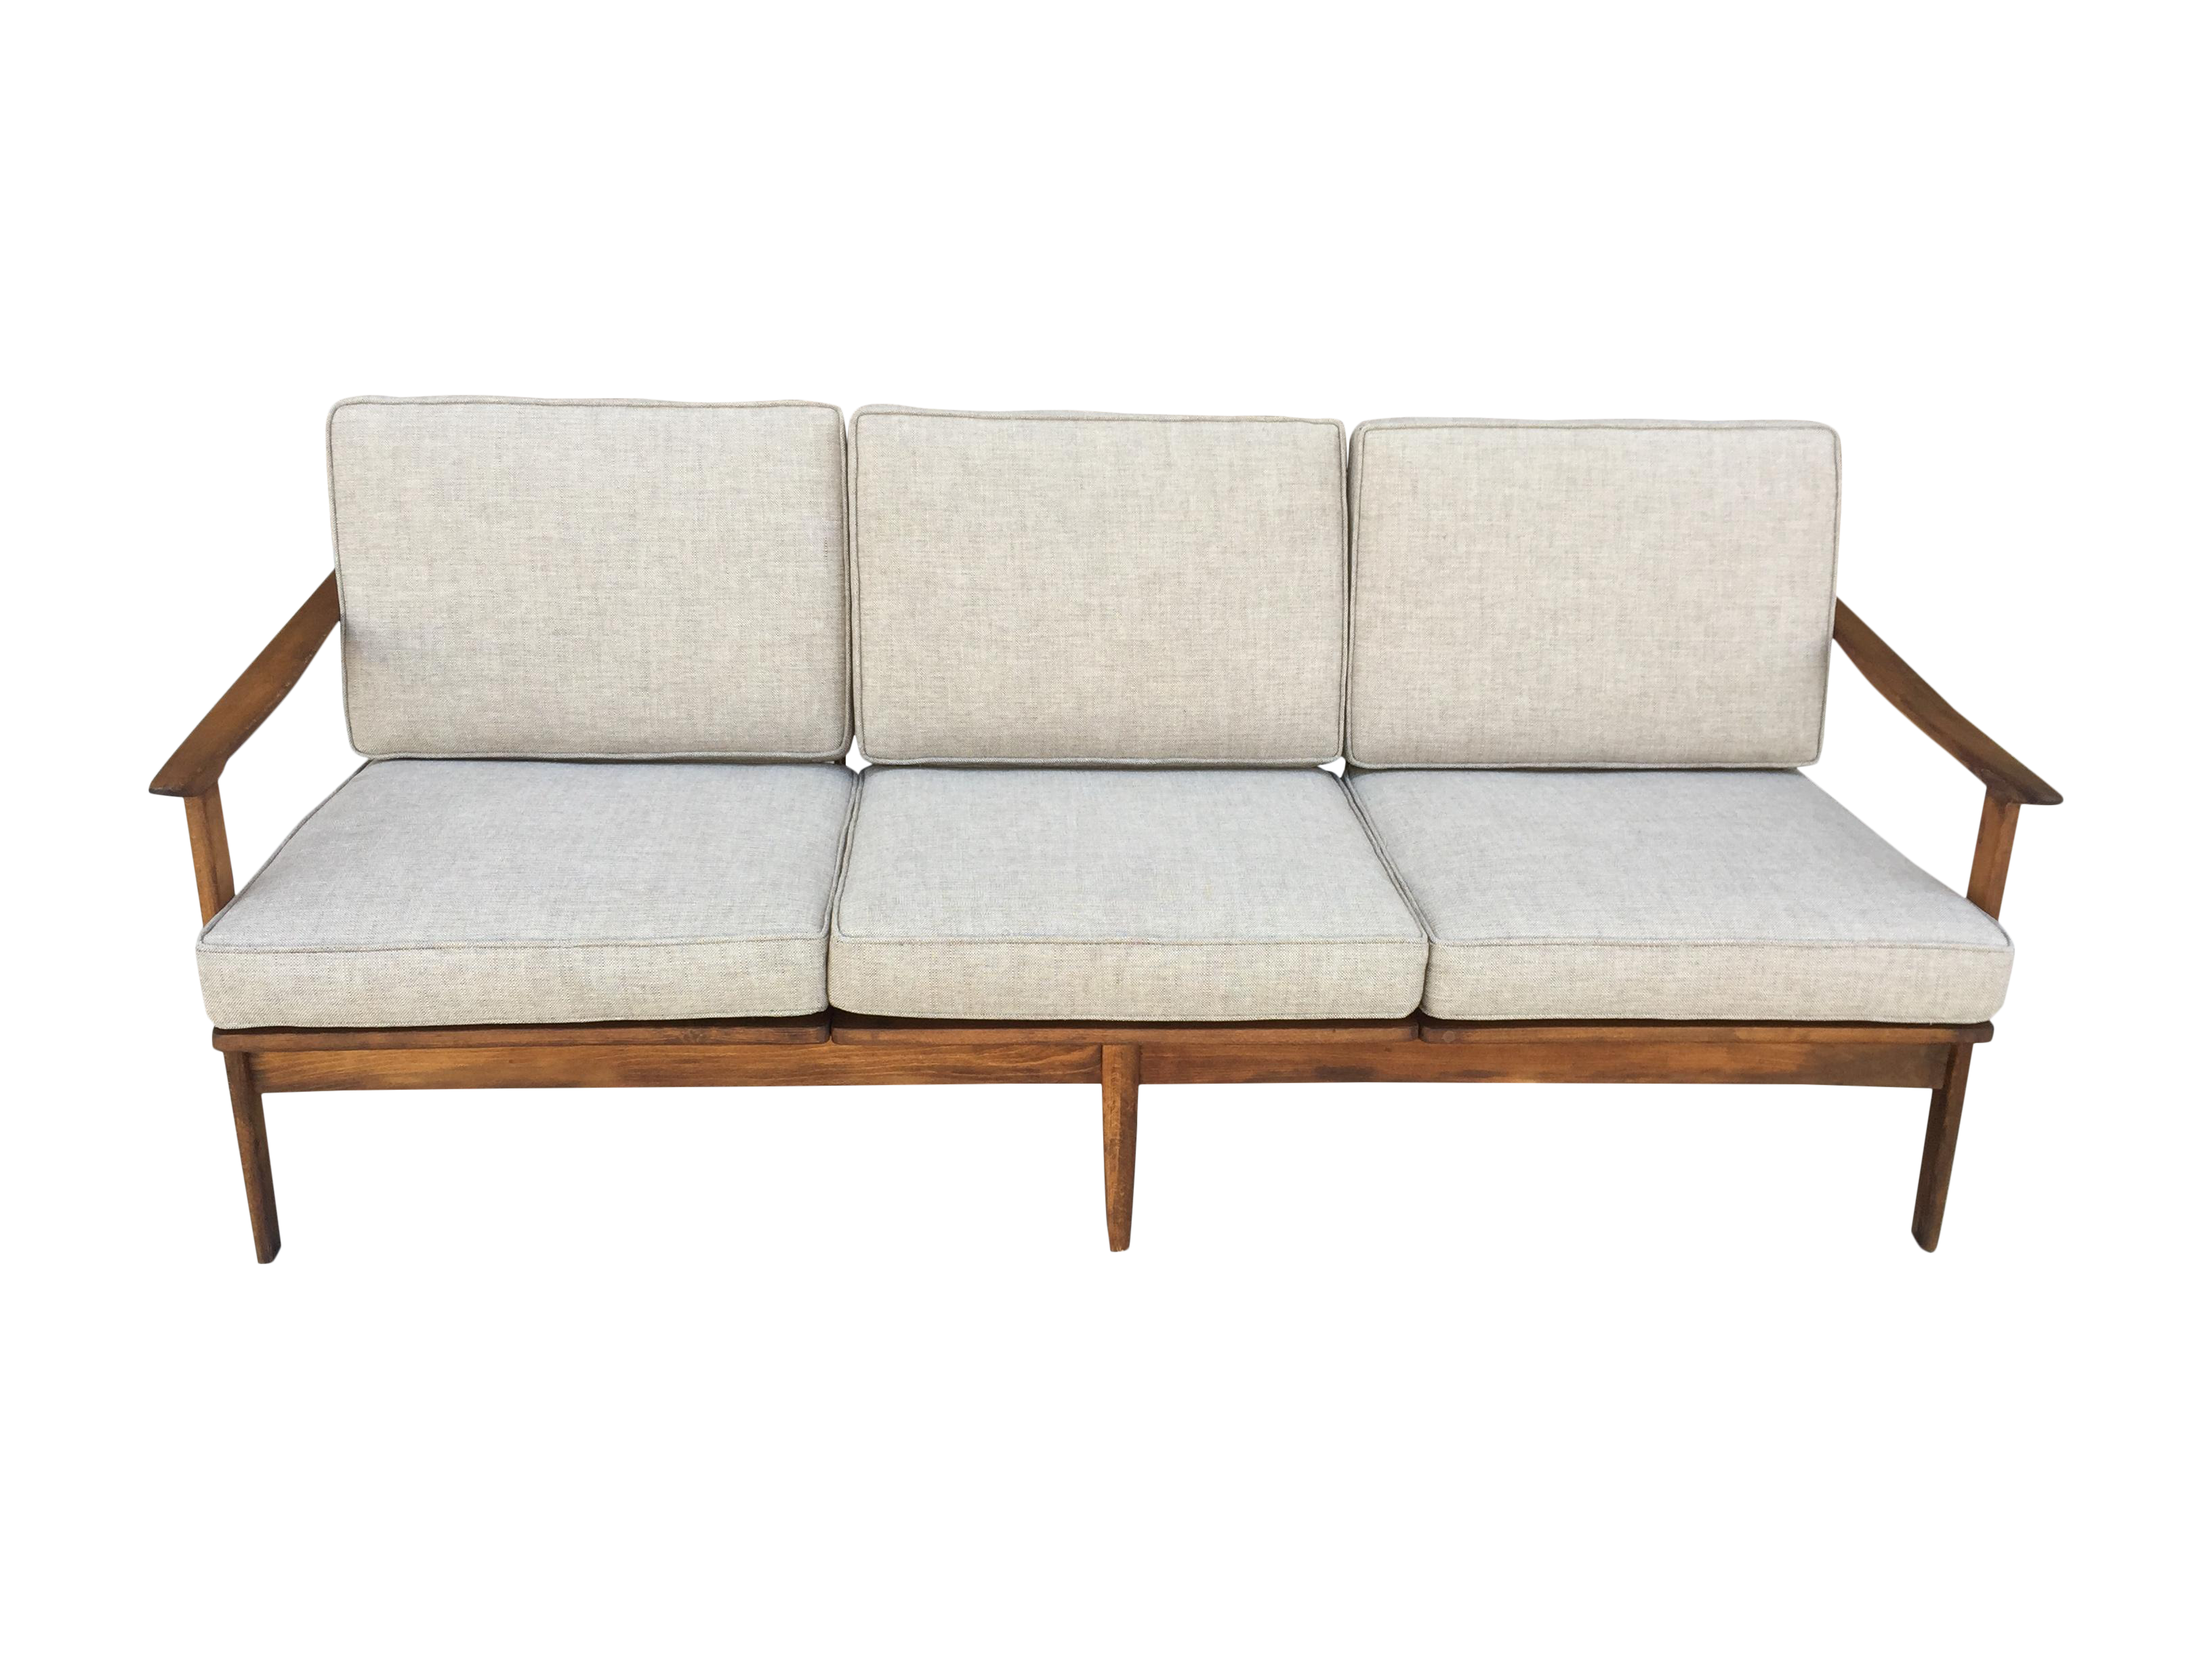 Mid Century Modern Three Seater Sofa On Chairish Outdoor Sofa Throughout Mid Century 3 Seat Couches (View 8 of 20)